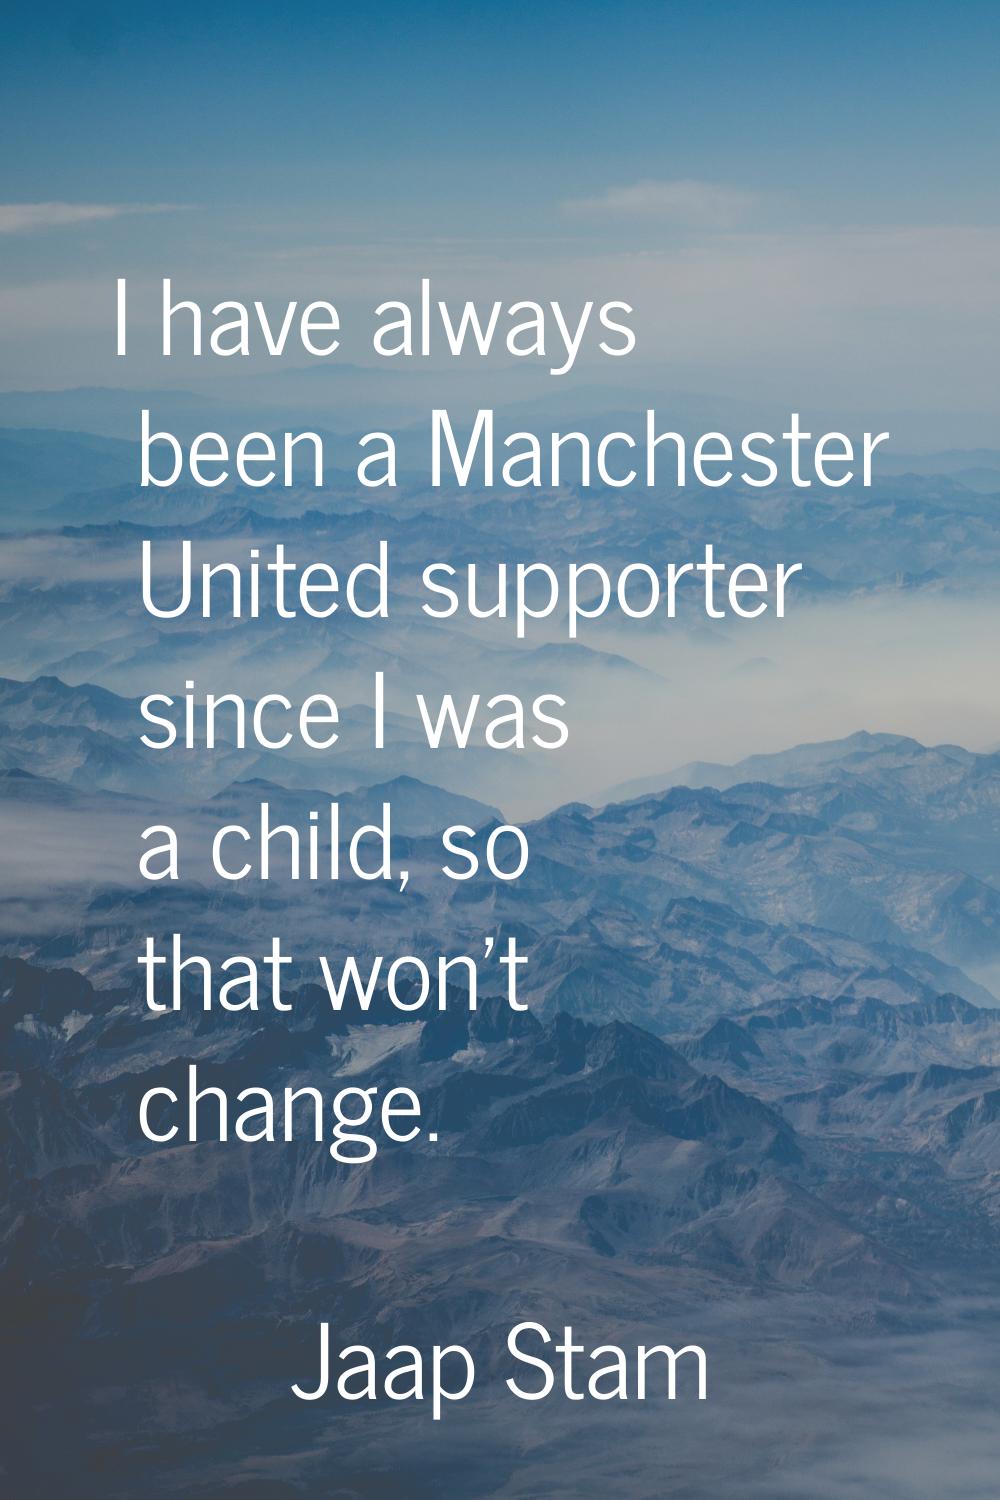 I have always been a Manchester United supporter since I was a child, so that won't change.